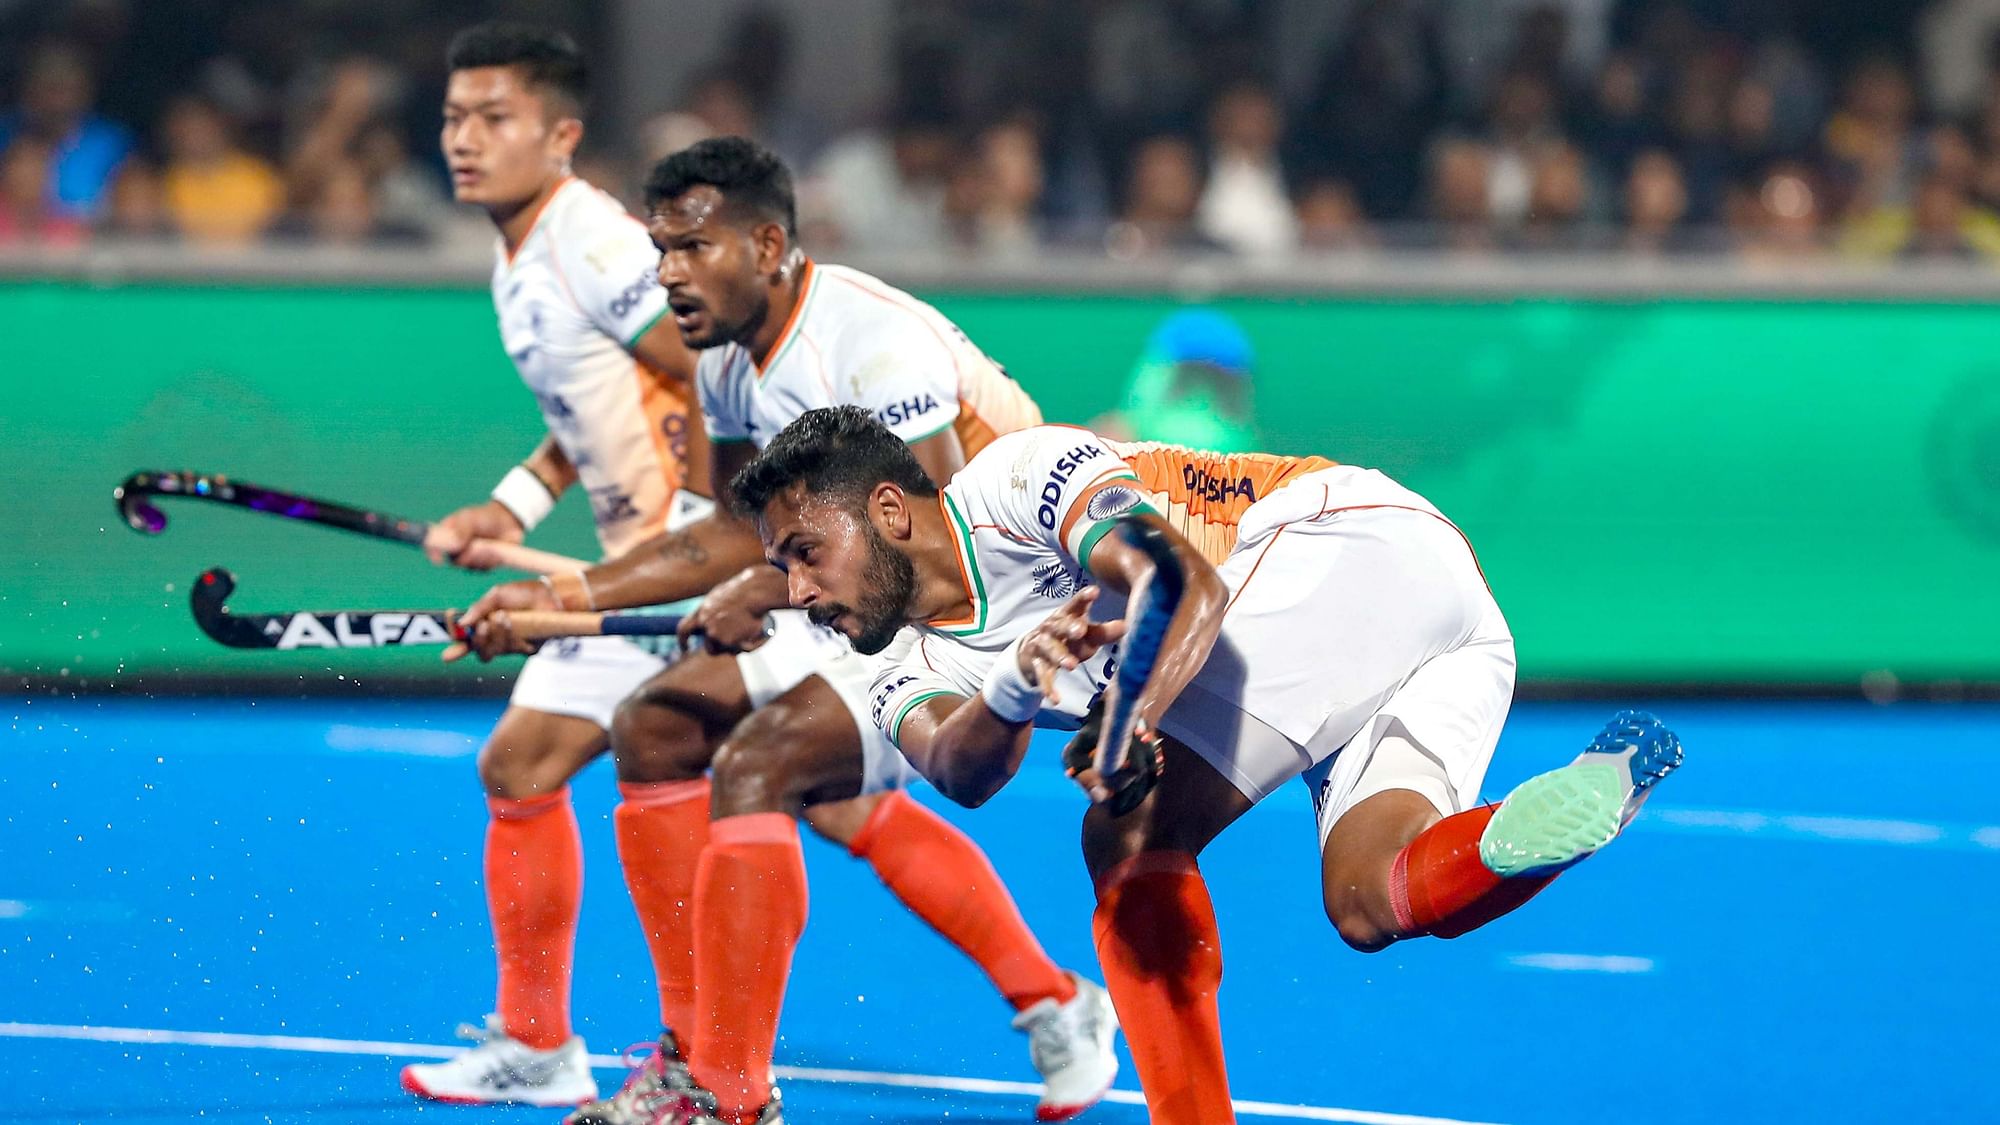 2023 Mens Hockey World Cup final Belgium vs Germany Live Streaming, When, Where to Watch